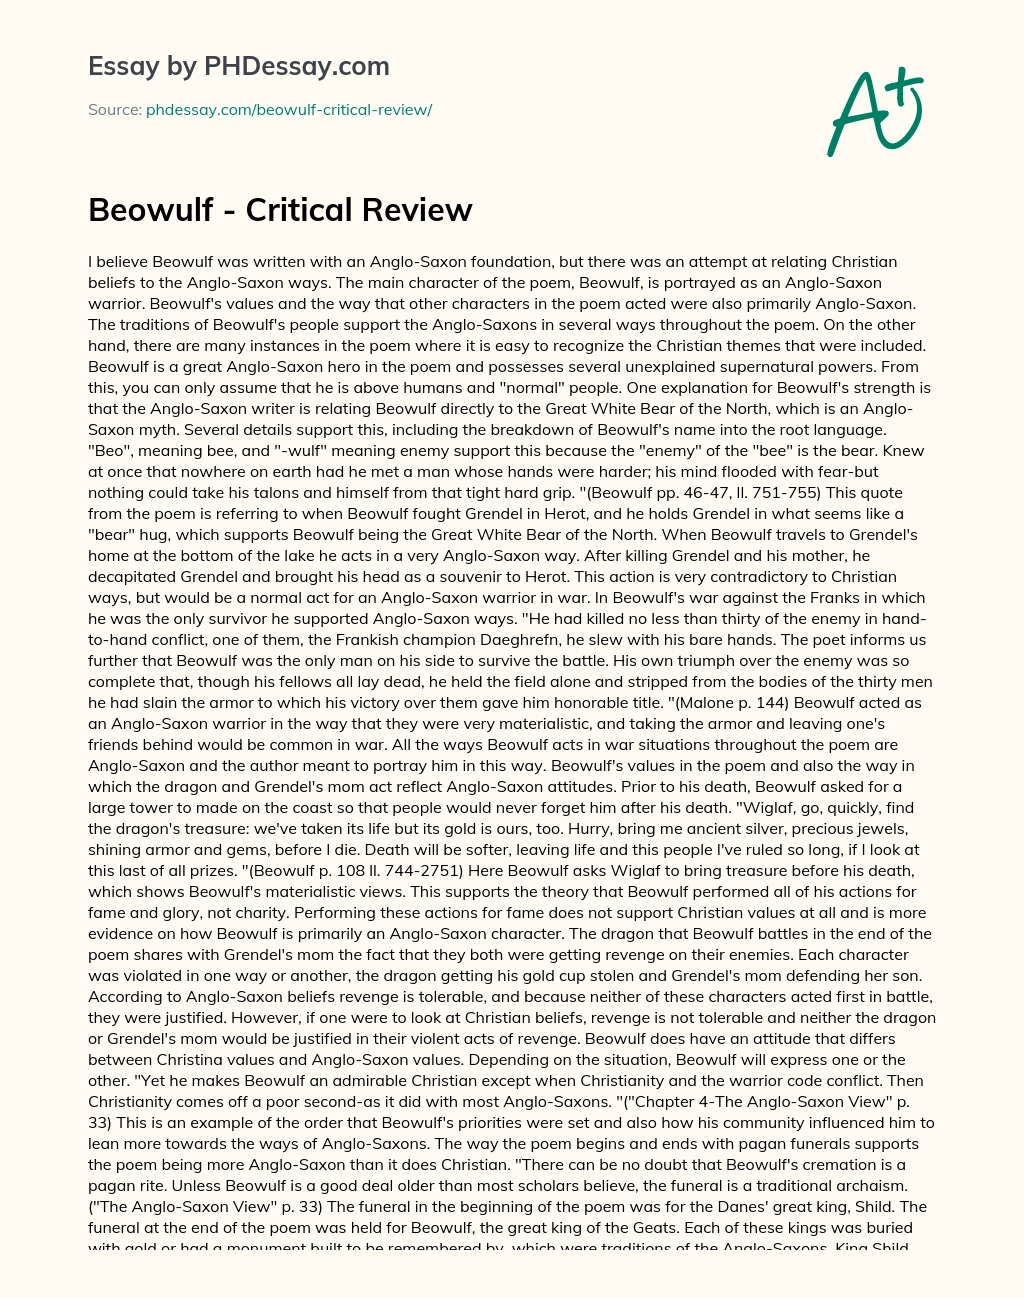 Beowulf – Critical Review essay